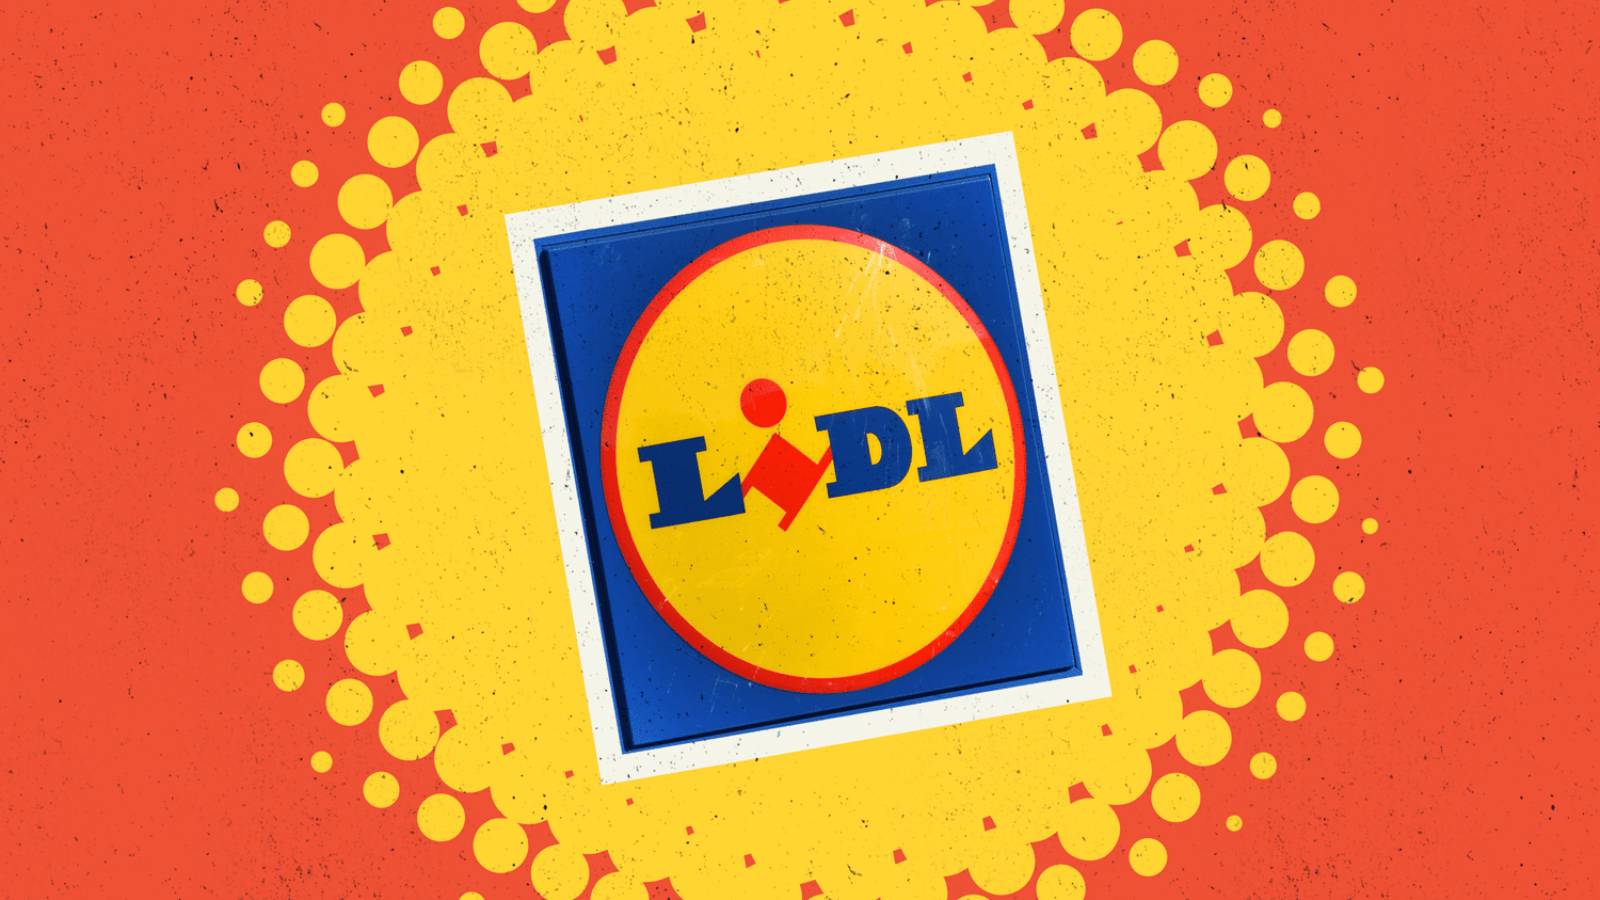 LIDL Romania Announces All Romanians FREE Any New